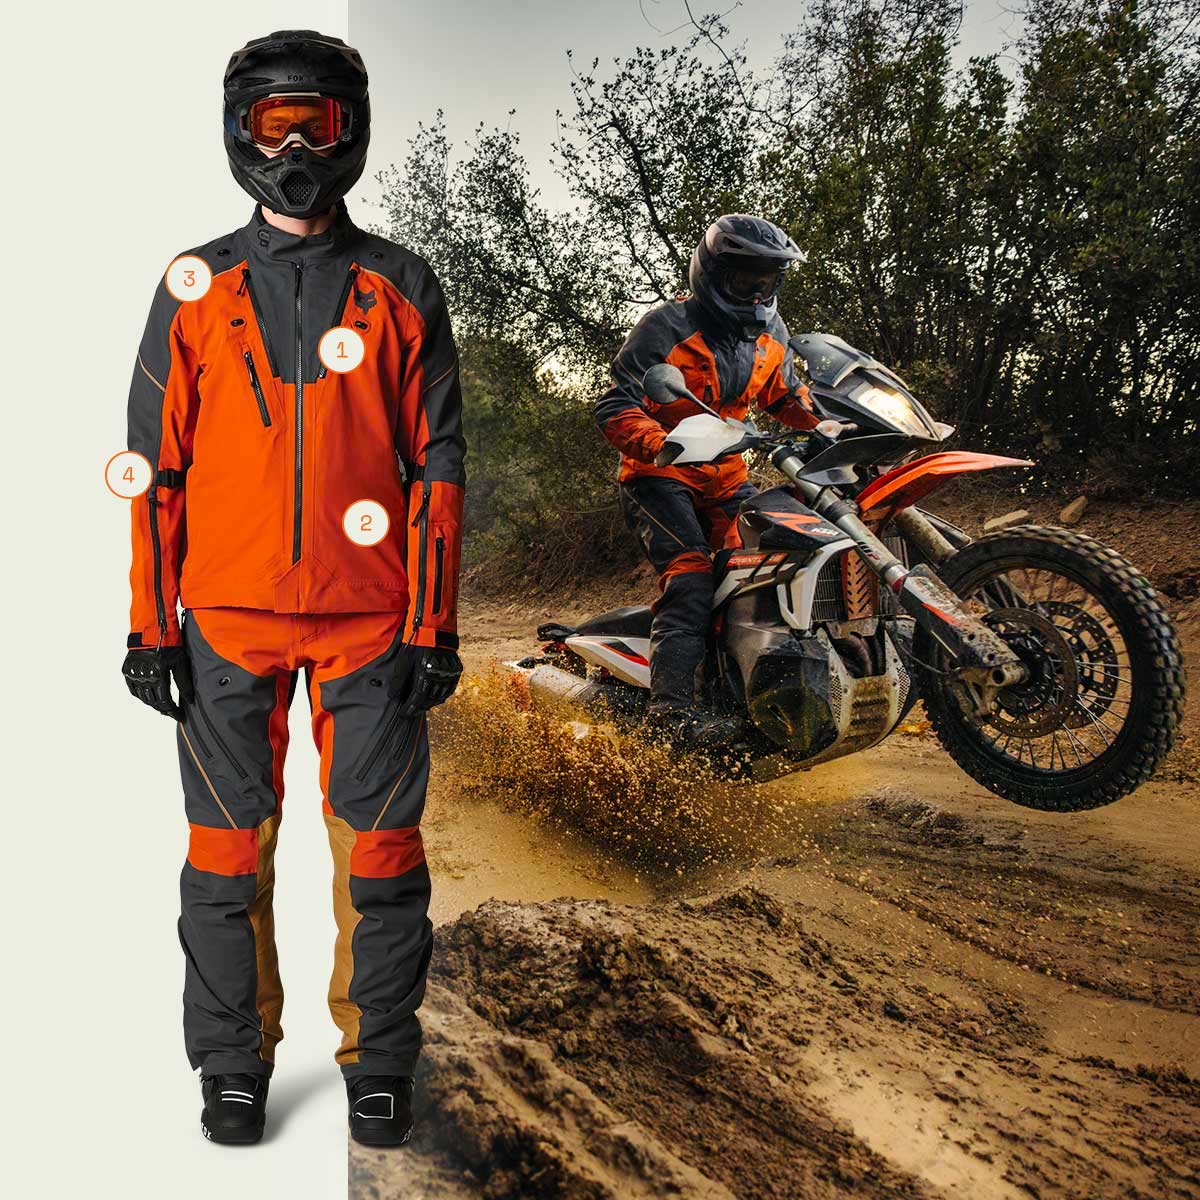 A model wearing the Defend Adventure gear stands next to a rider wearing the same kit, doing a wheelie on a muddy trail.